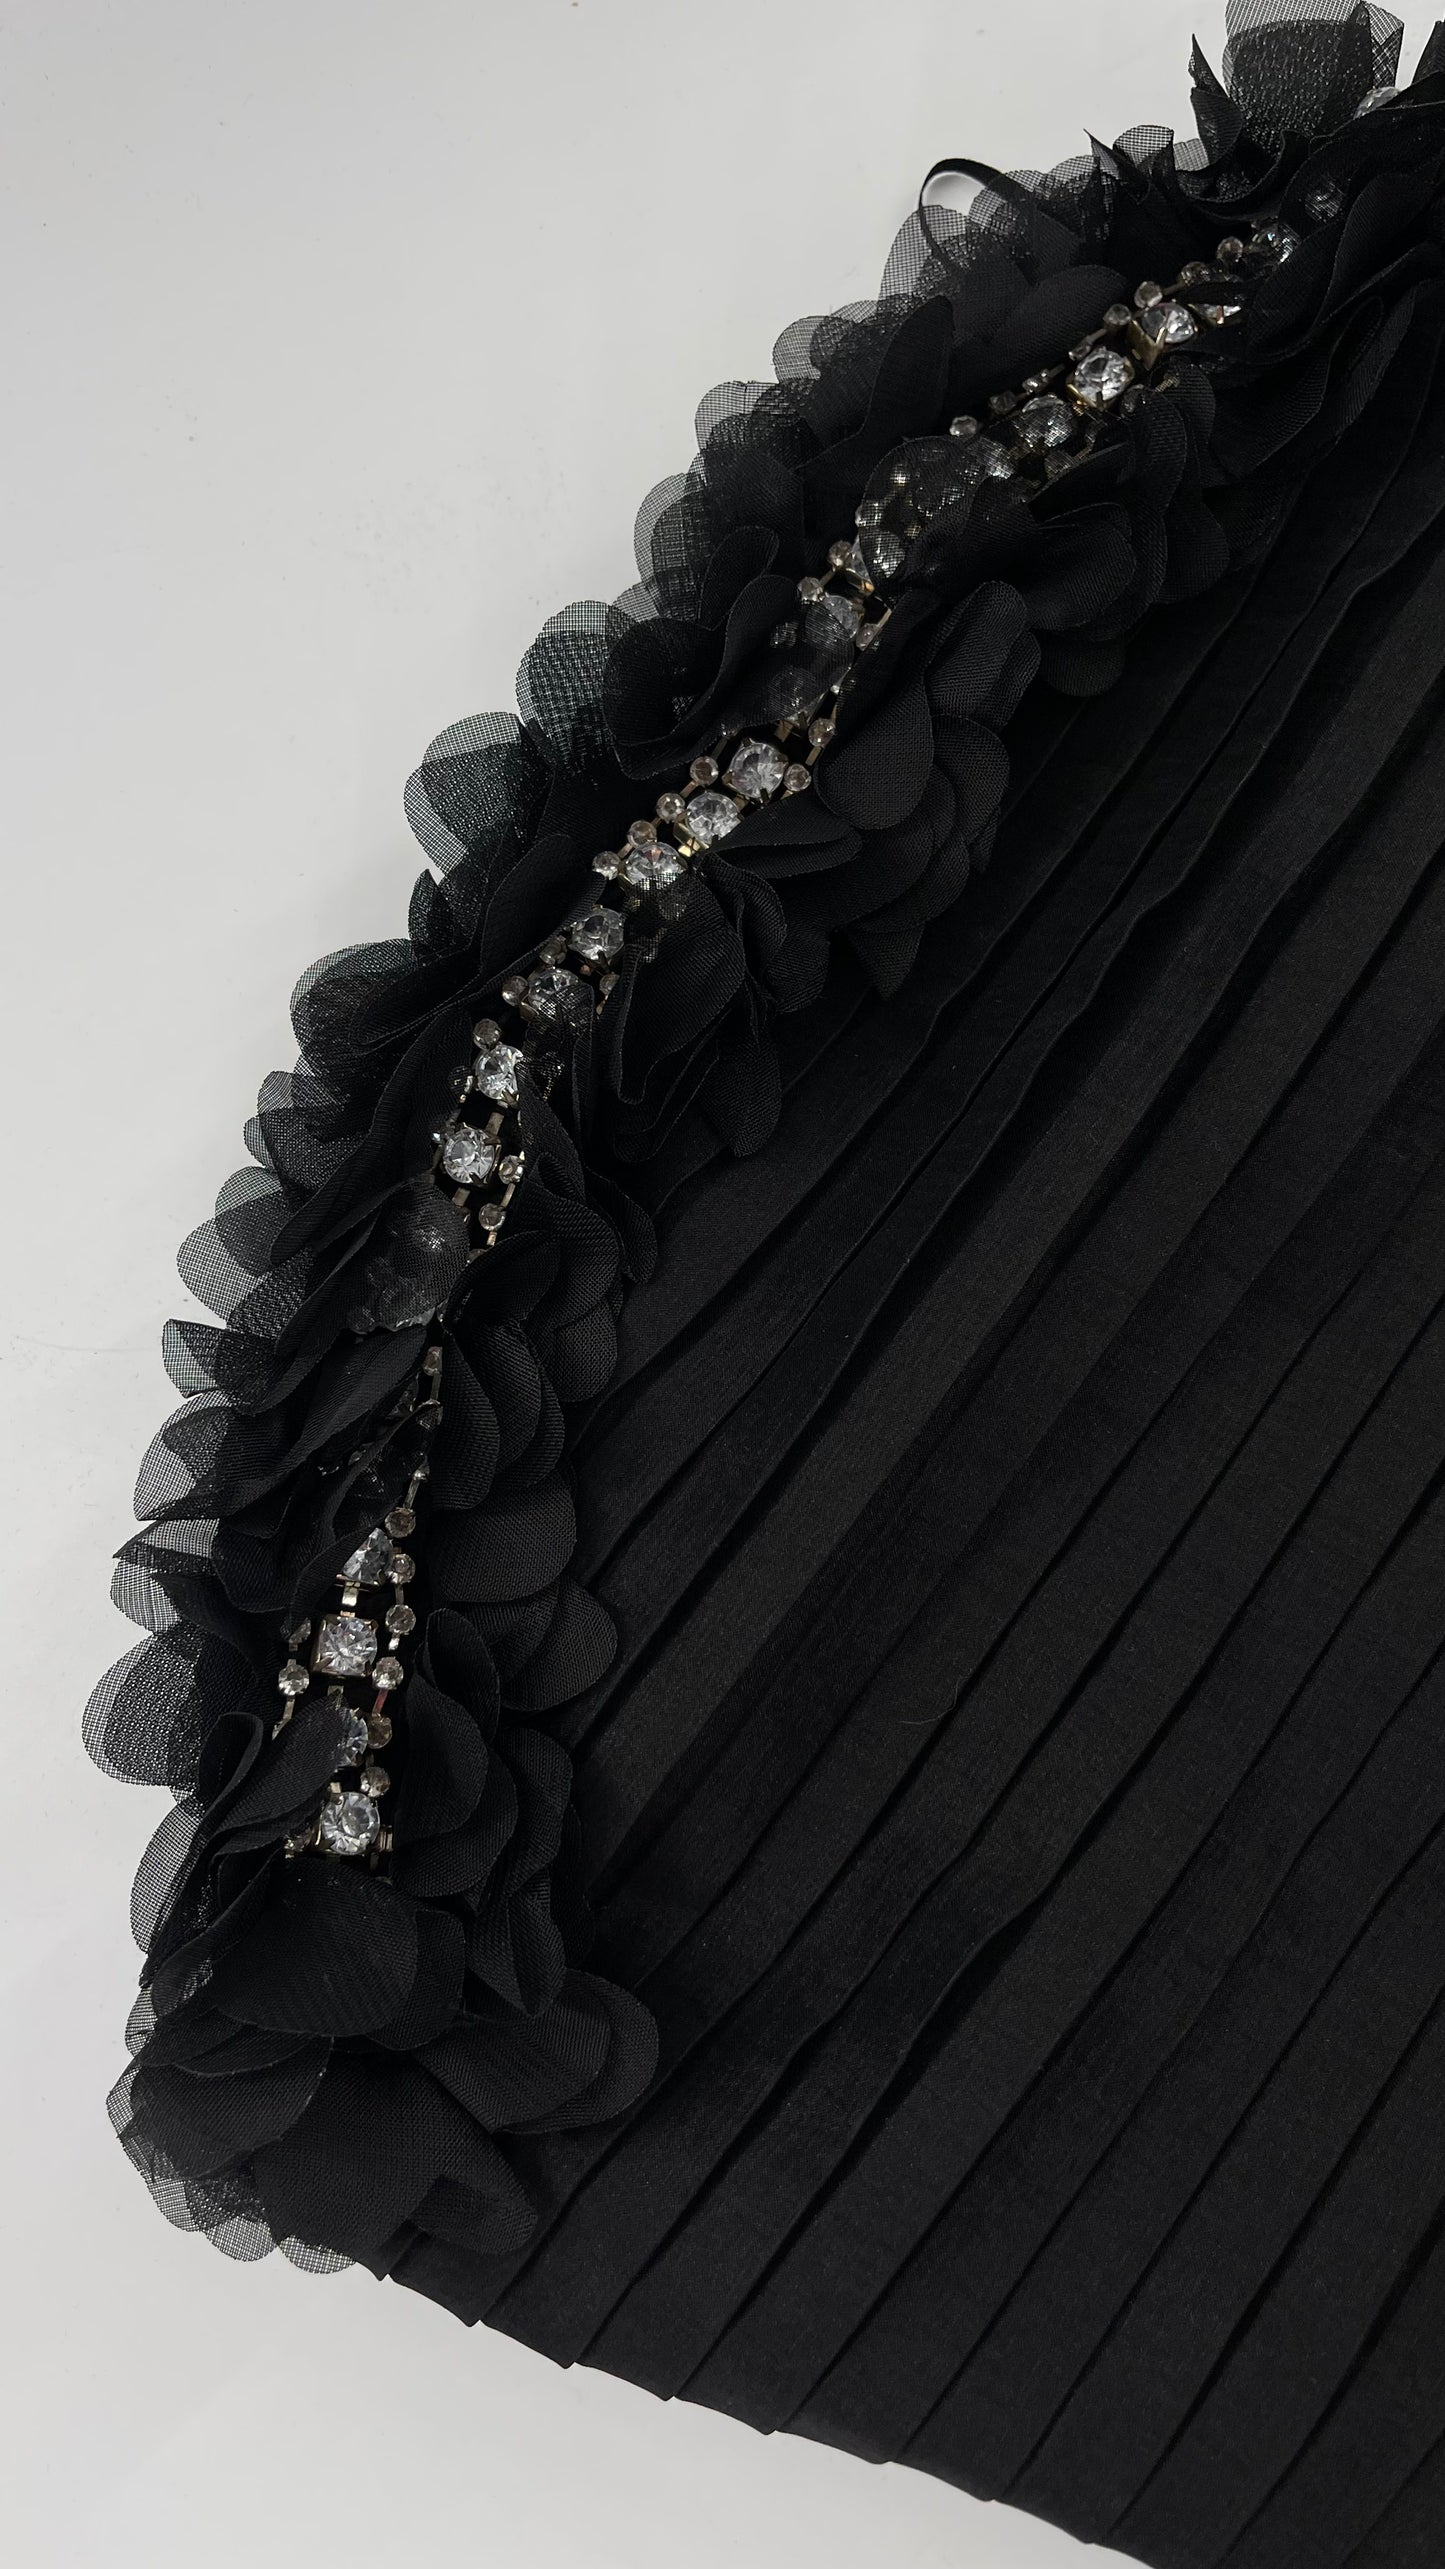 C.O:GWBG Black Dress with Pleated Bodice, Floral Ruffled Skirt and Bedazzled Bustline (S/M)